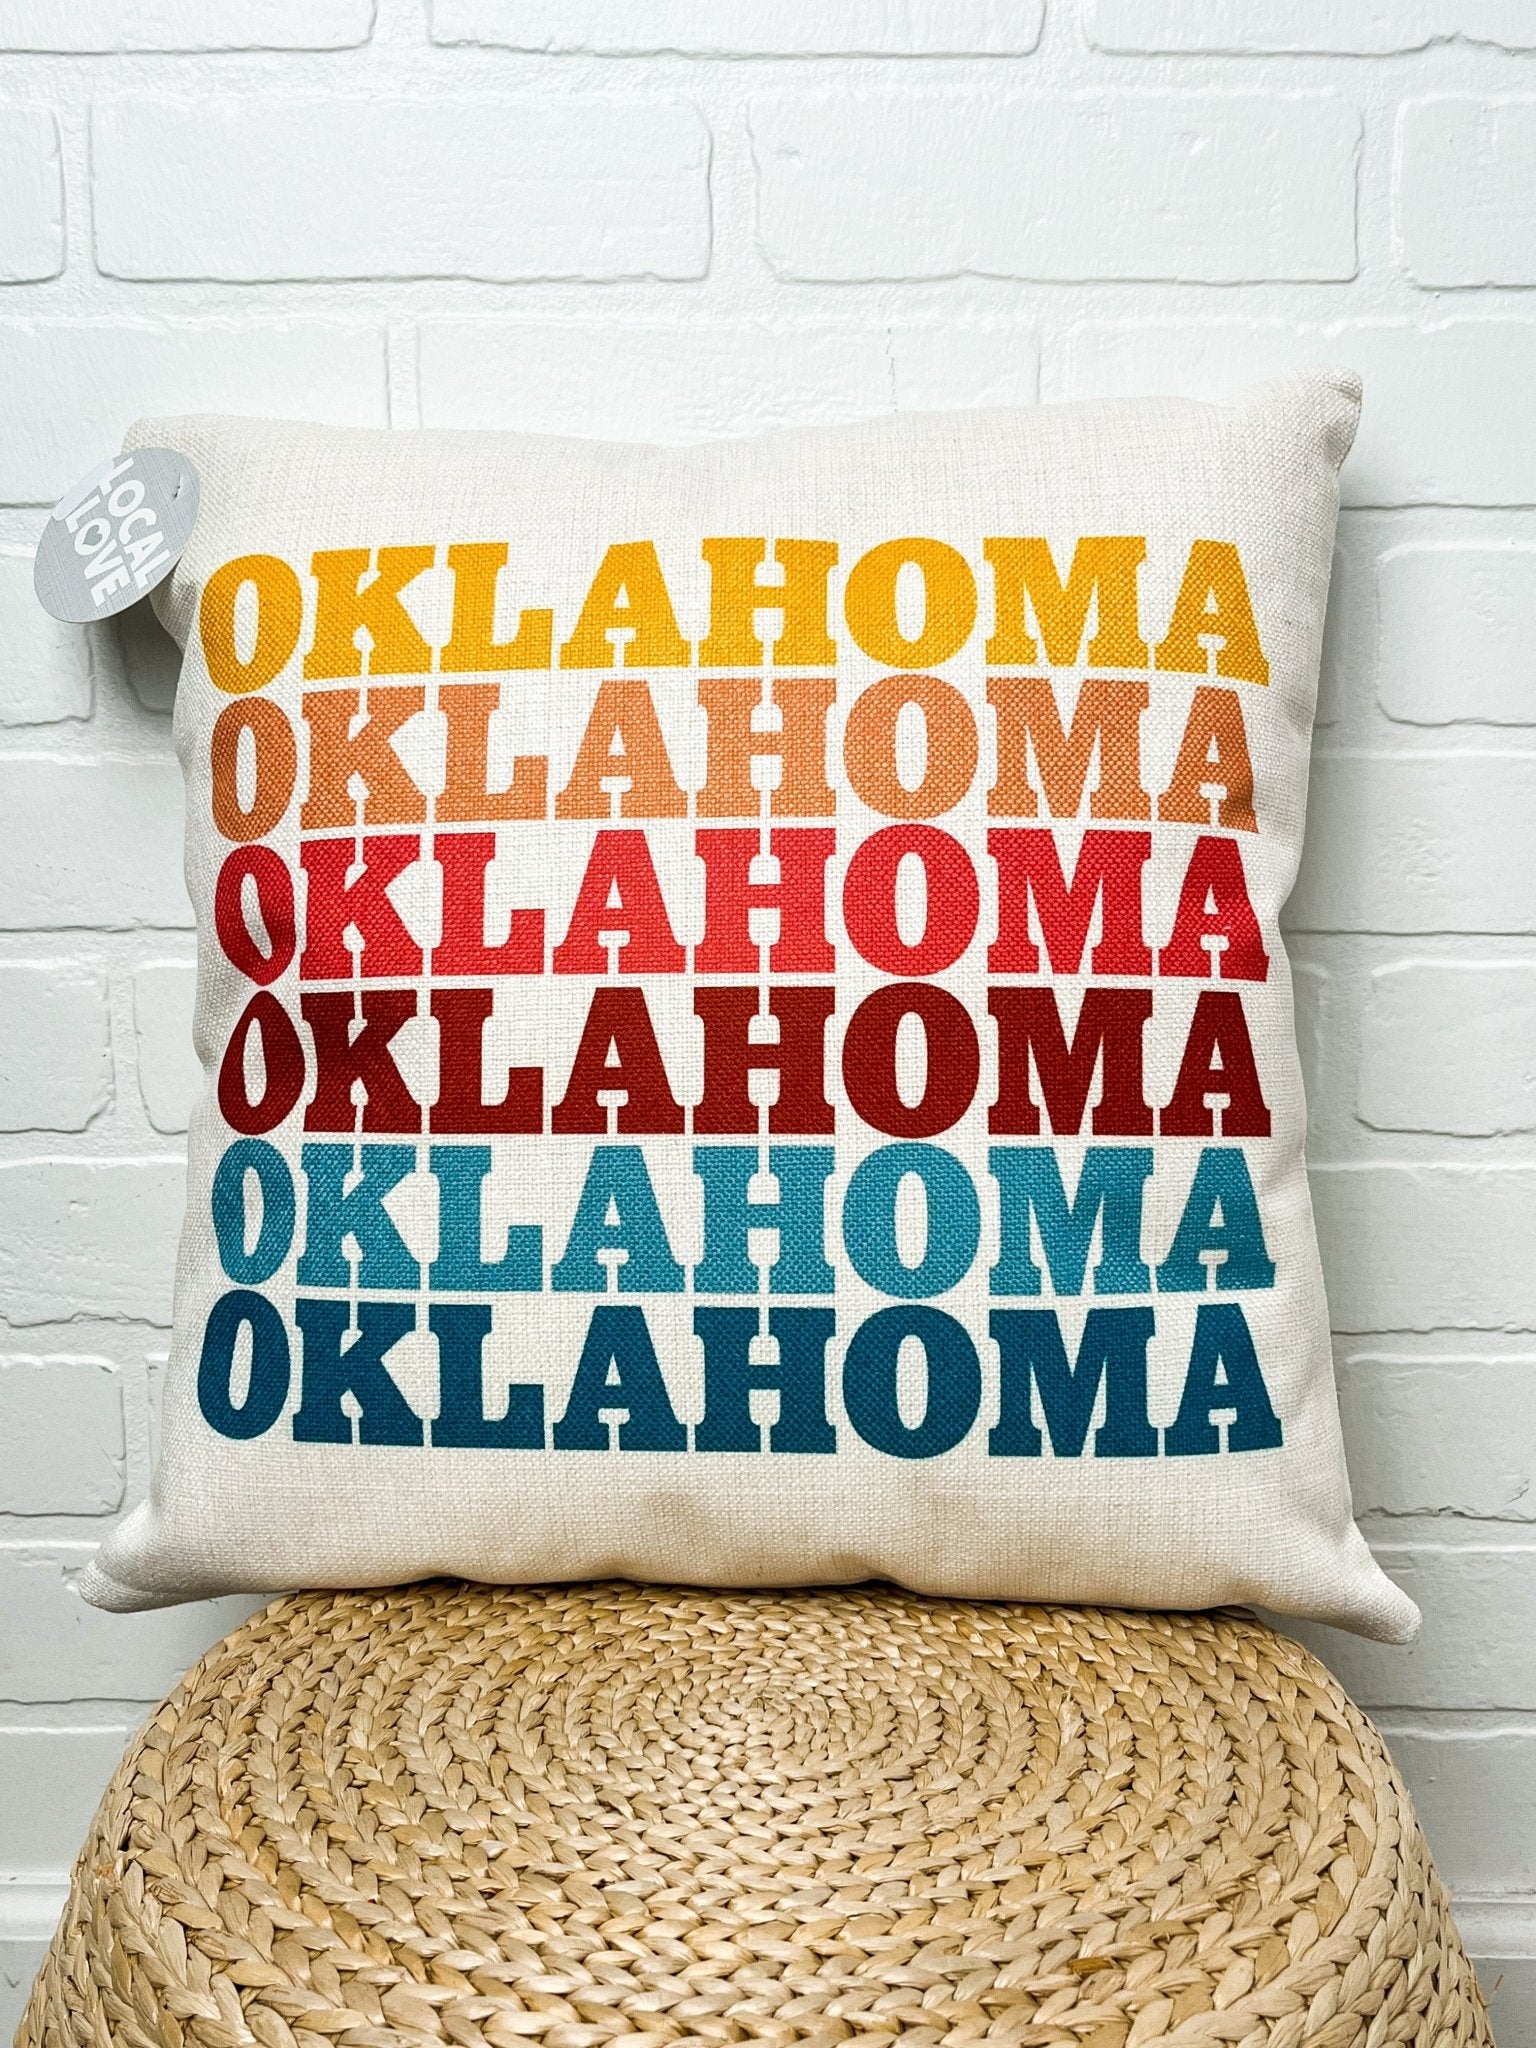 Oklahoma repeater square pillow - Trendy Gifts at Lush Fashion Lounge Boutique in Oklahoma City